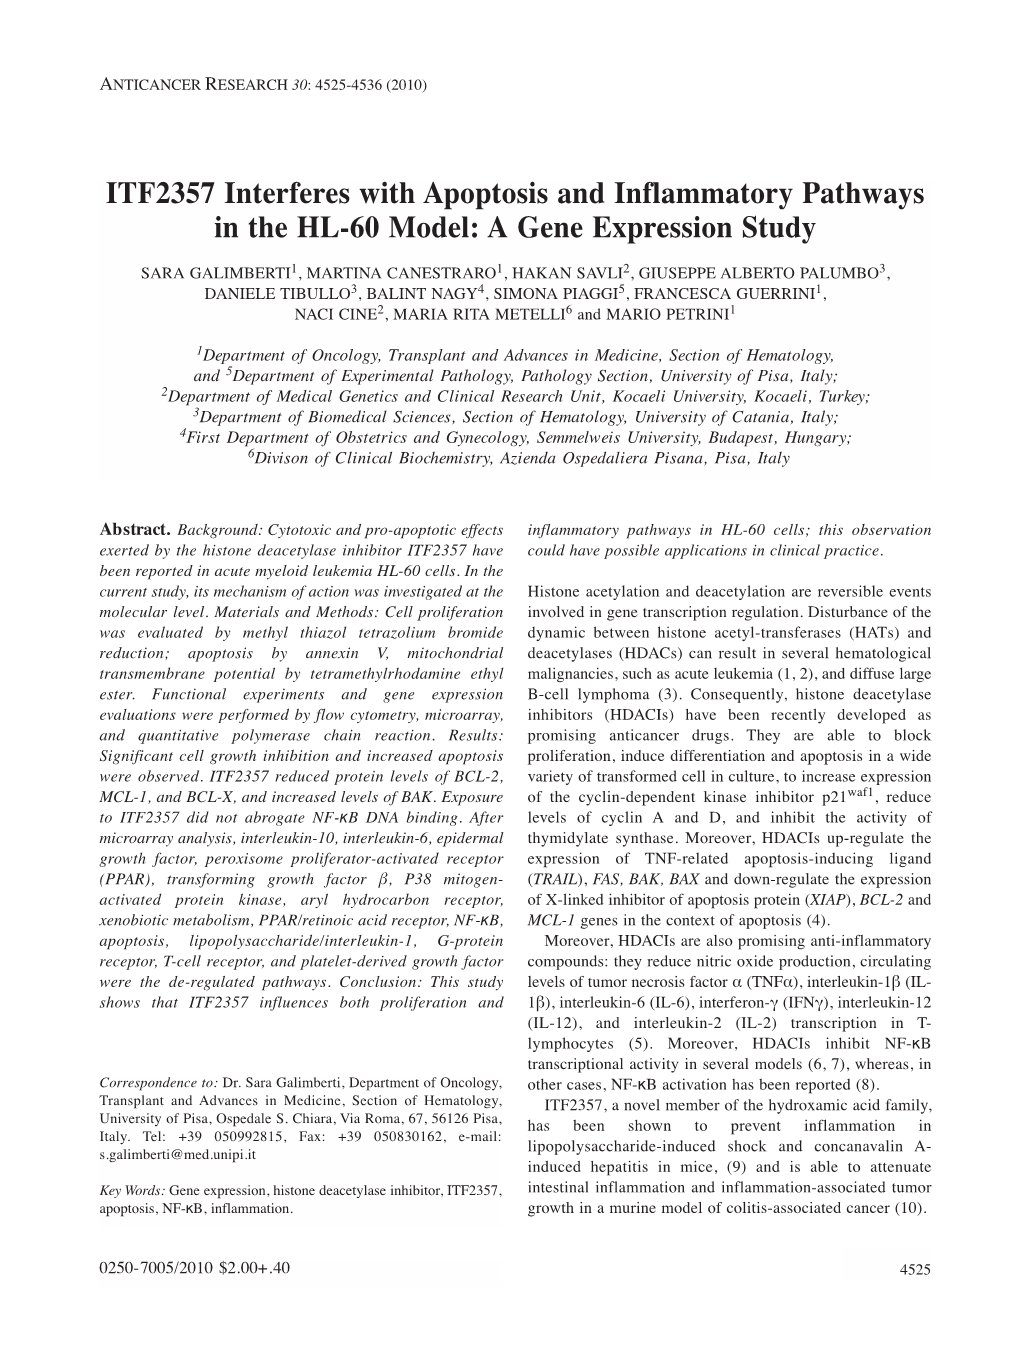 ITF2357 Interferes with Apoptosis and Inflammatory Pathways in the HL-60 Model: a Gene Expression Study